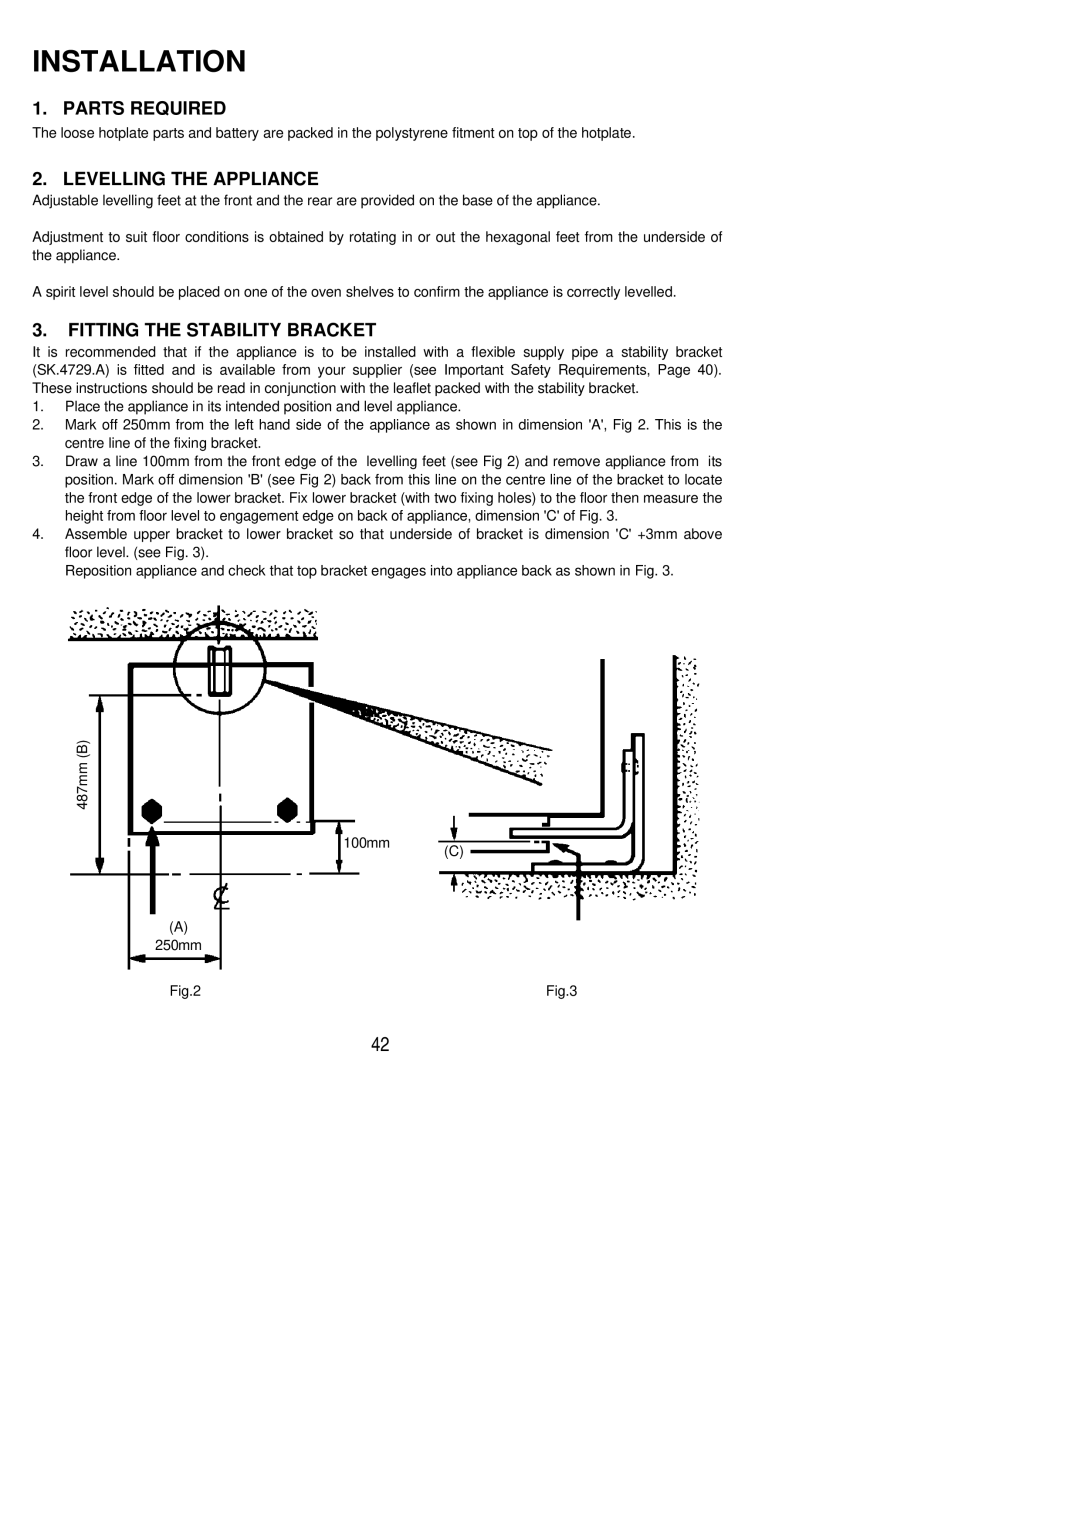 Electrolux SIG 332 installation instructions Parts Required, Levelling the Appliance, Fitting the Stability Bracket 